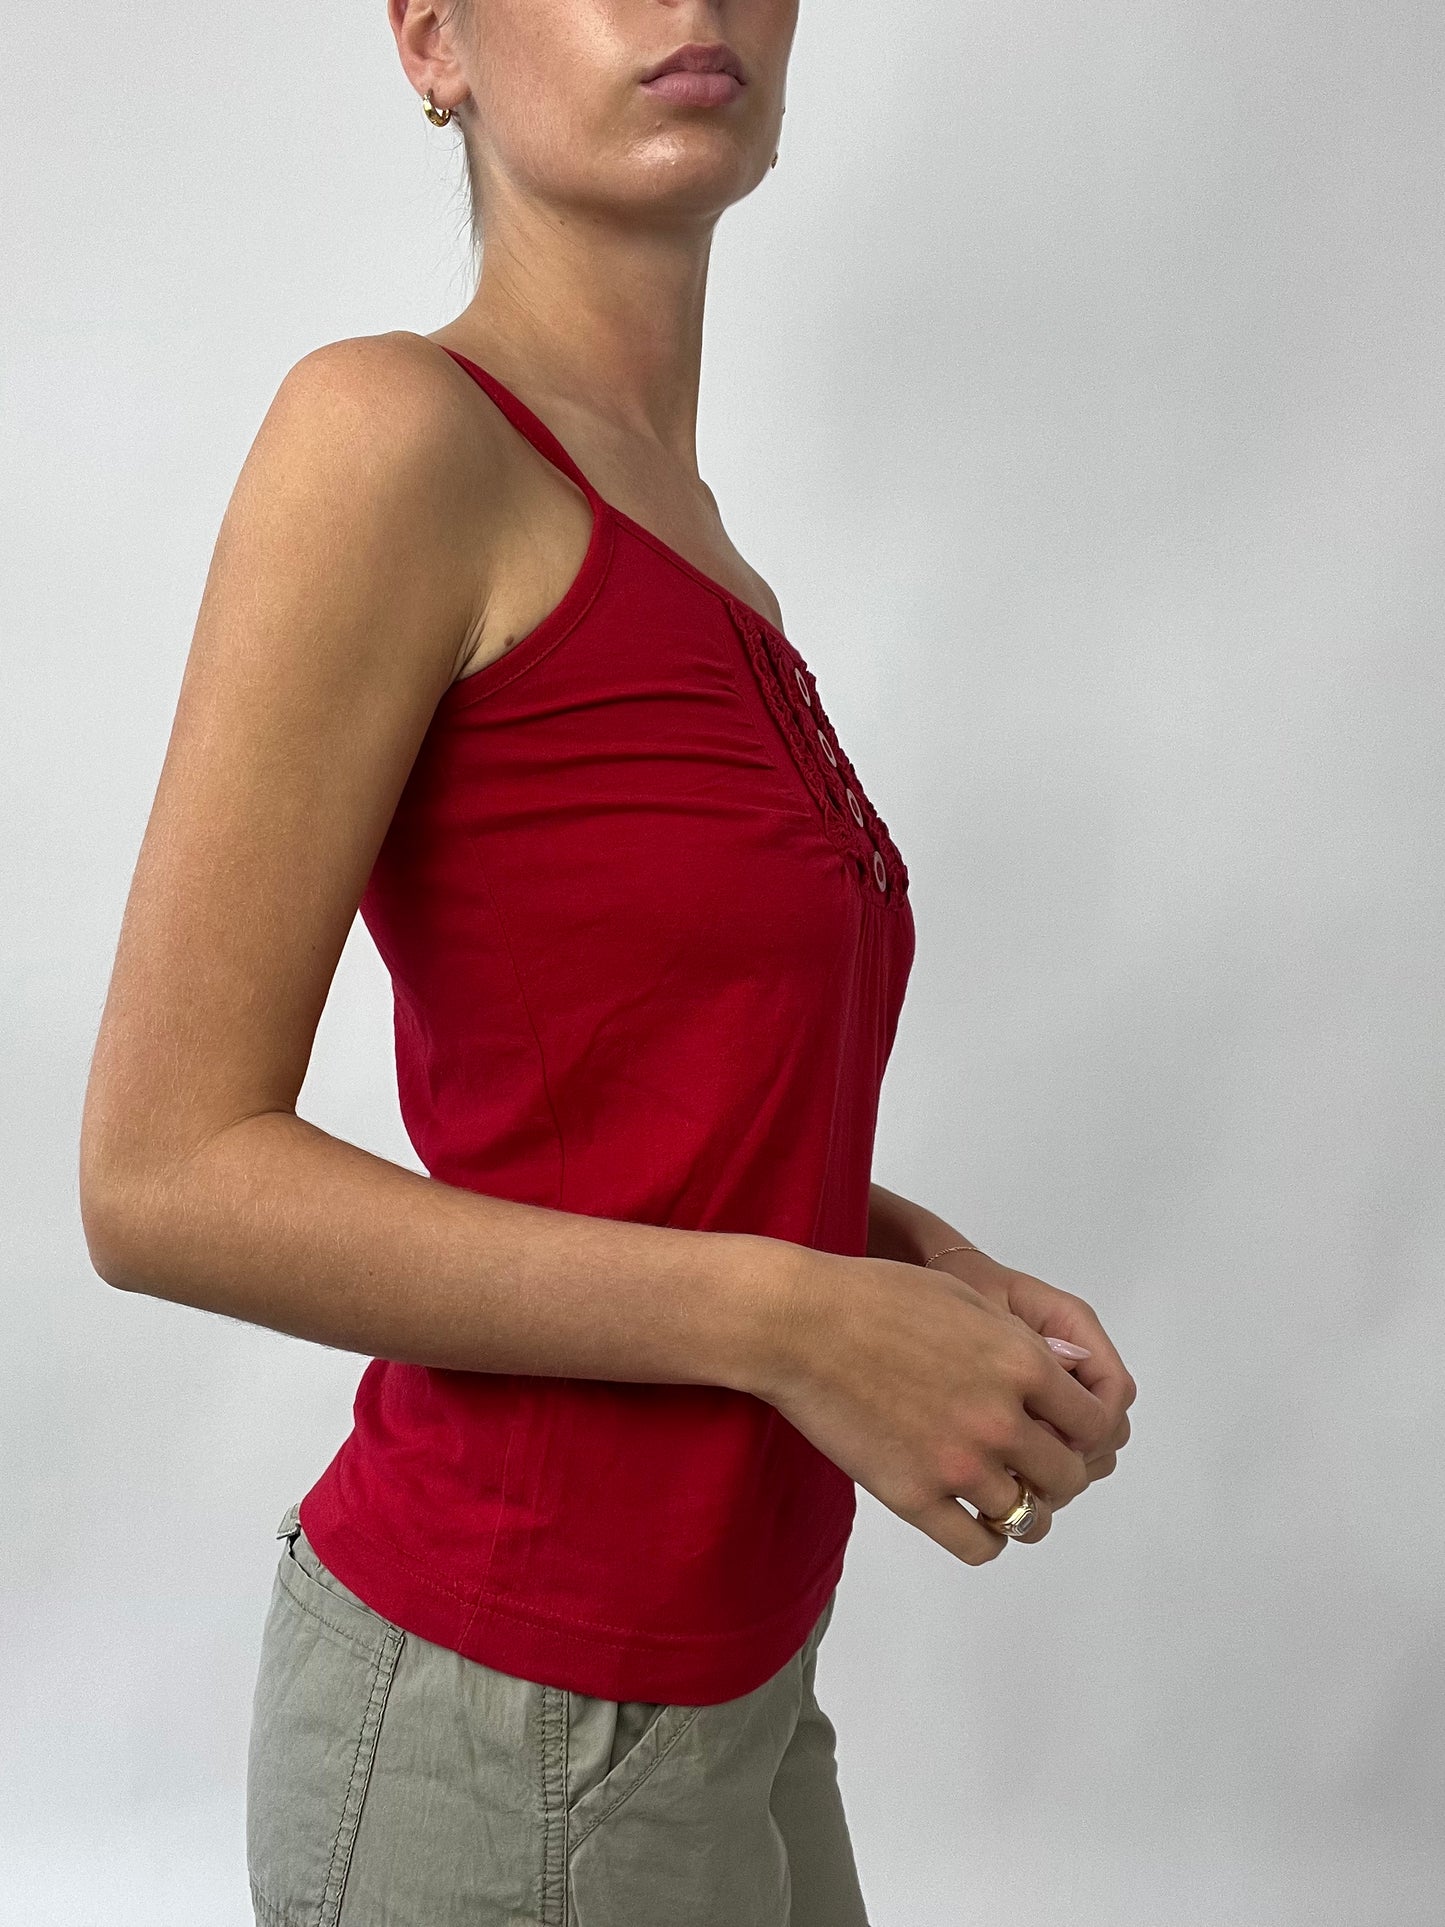 PUB GARDEN DROP | medium red cami with ruffles and buttons